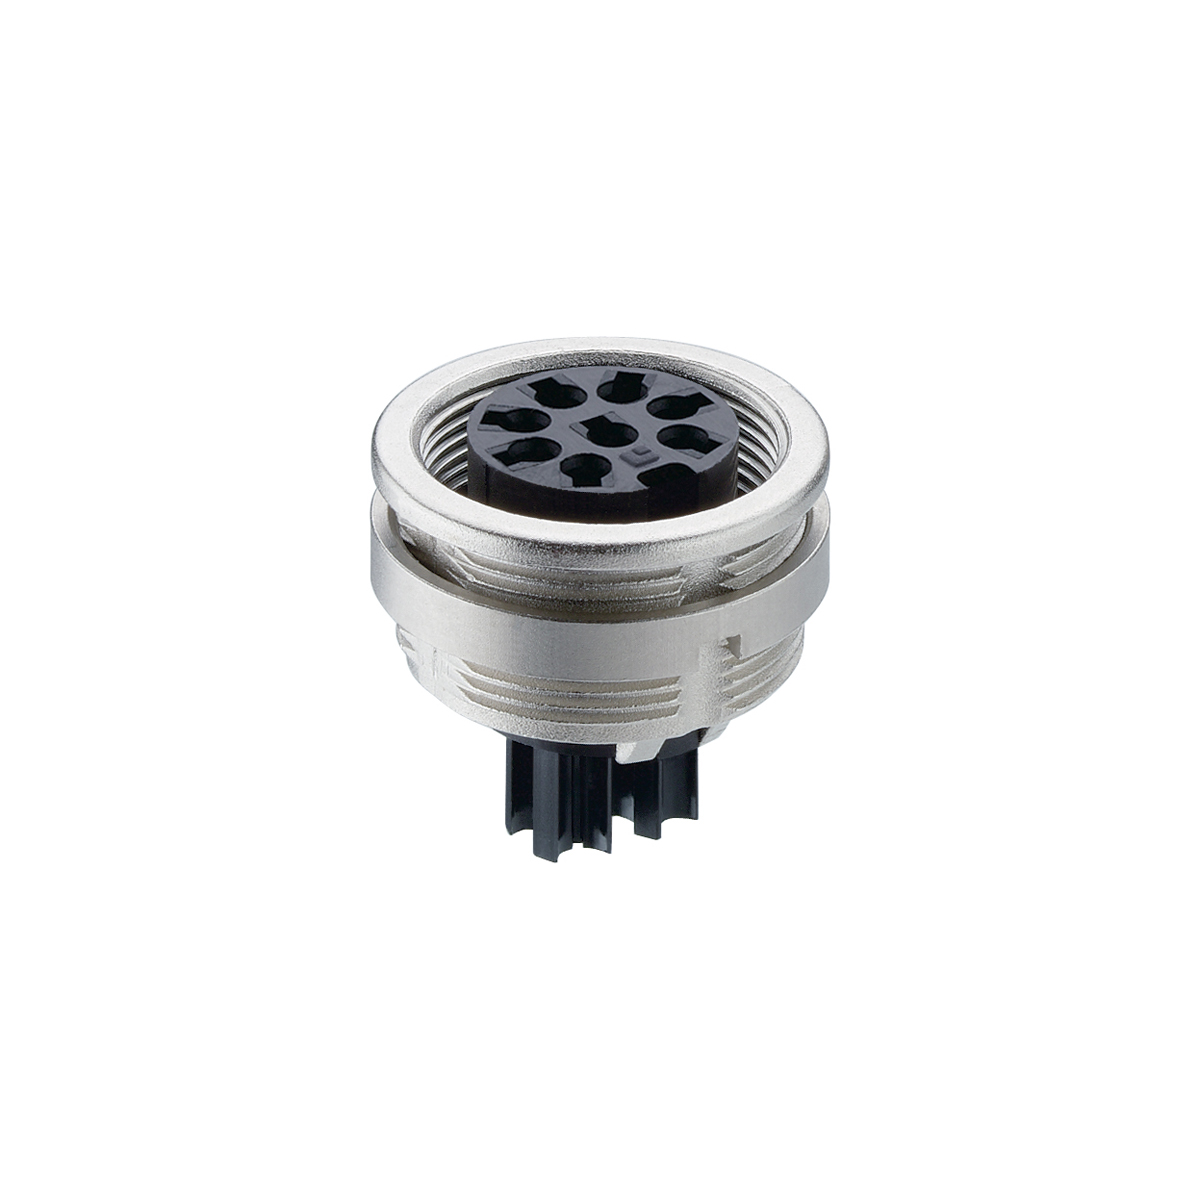 Lumberg: 362 (Series 03 | Circular connectors with threaded joint M16 acc. to IEC 61076-2-106, IP40/IP68)